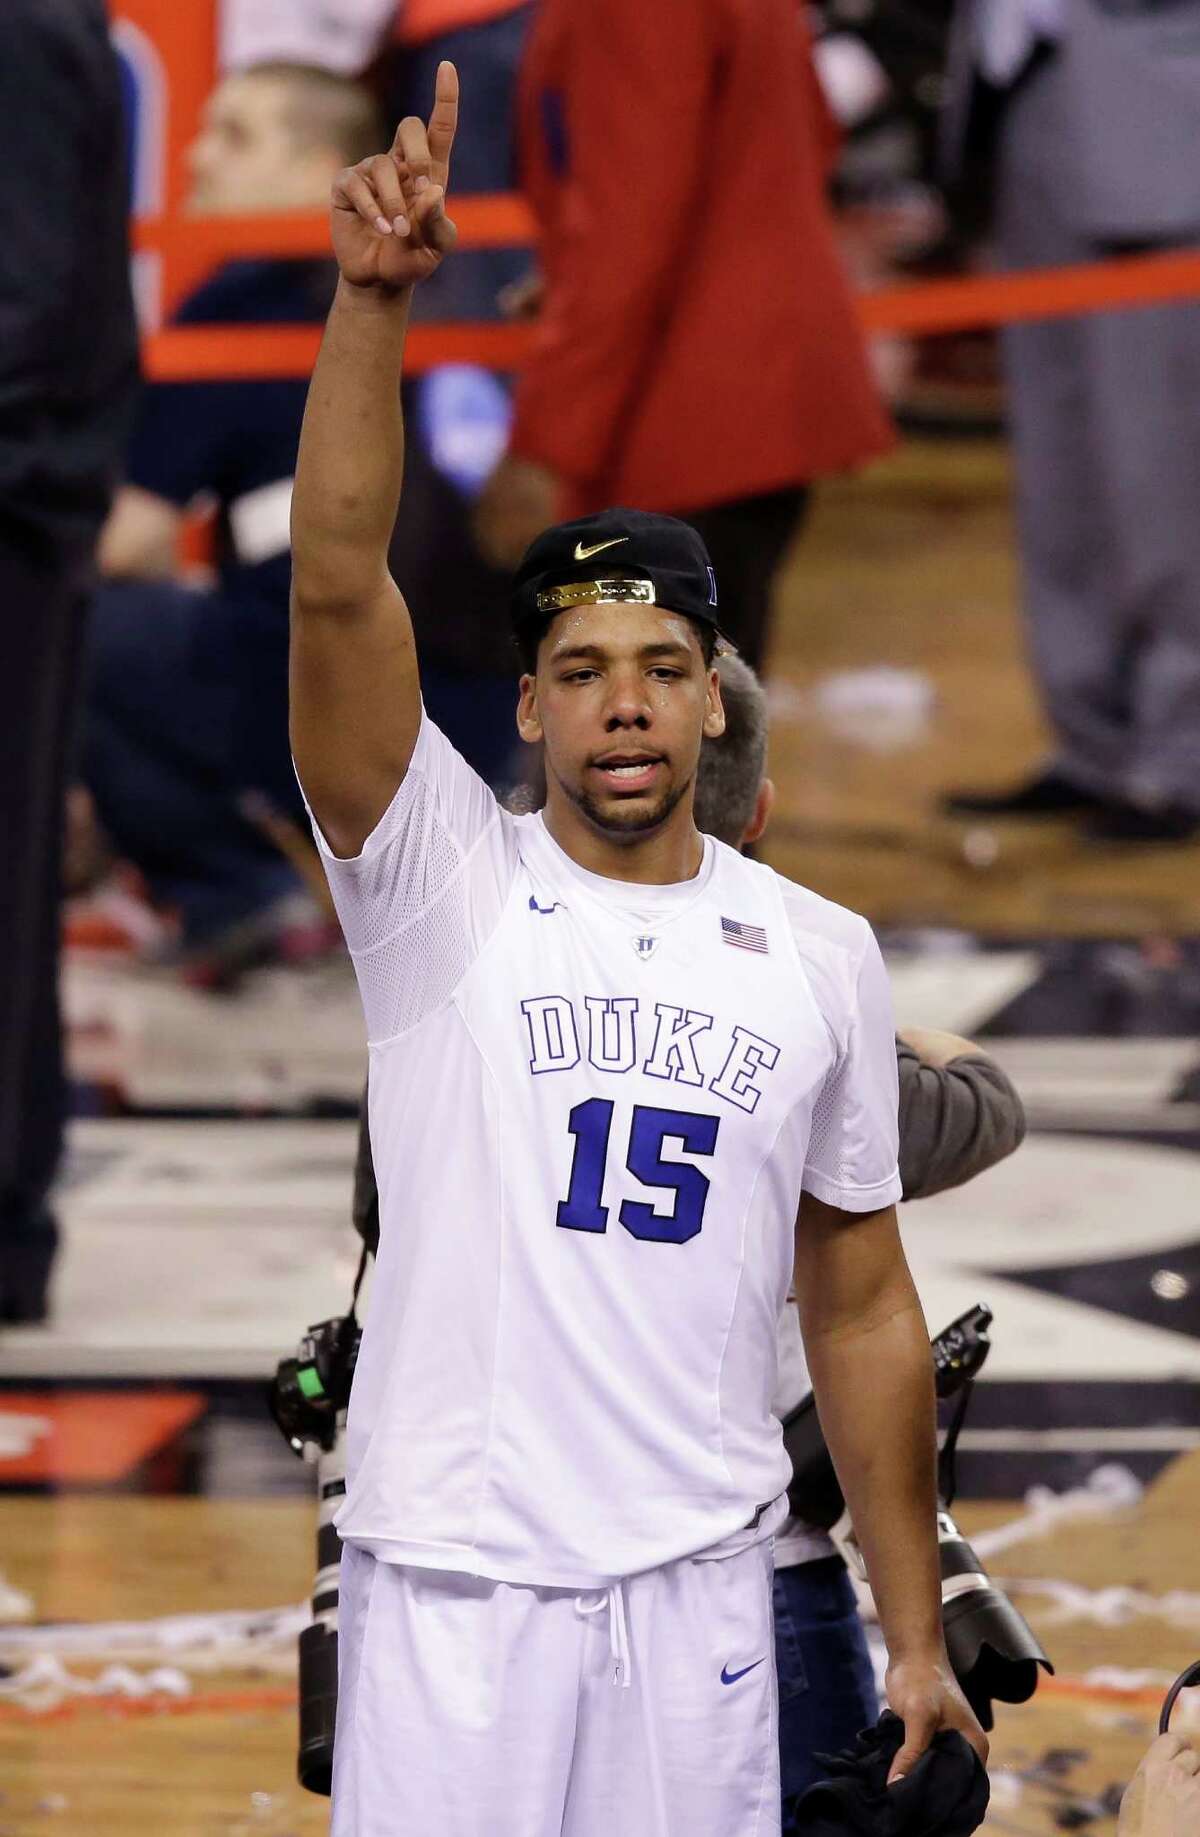 Duke's Jahlil Okafor celebrates after his team's 68-63 victory over Wisconsin in the NCAA Final Four college basketball tournament championship game Monday, April 6, 2015, in Indianapolis. (AP Photo/Darron Cummings) ORG XMIT: FF279